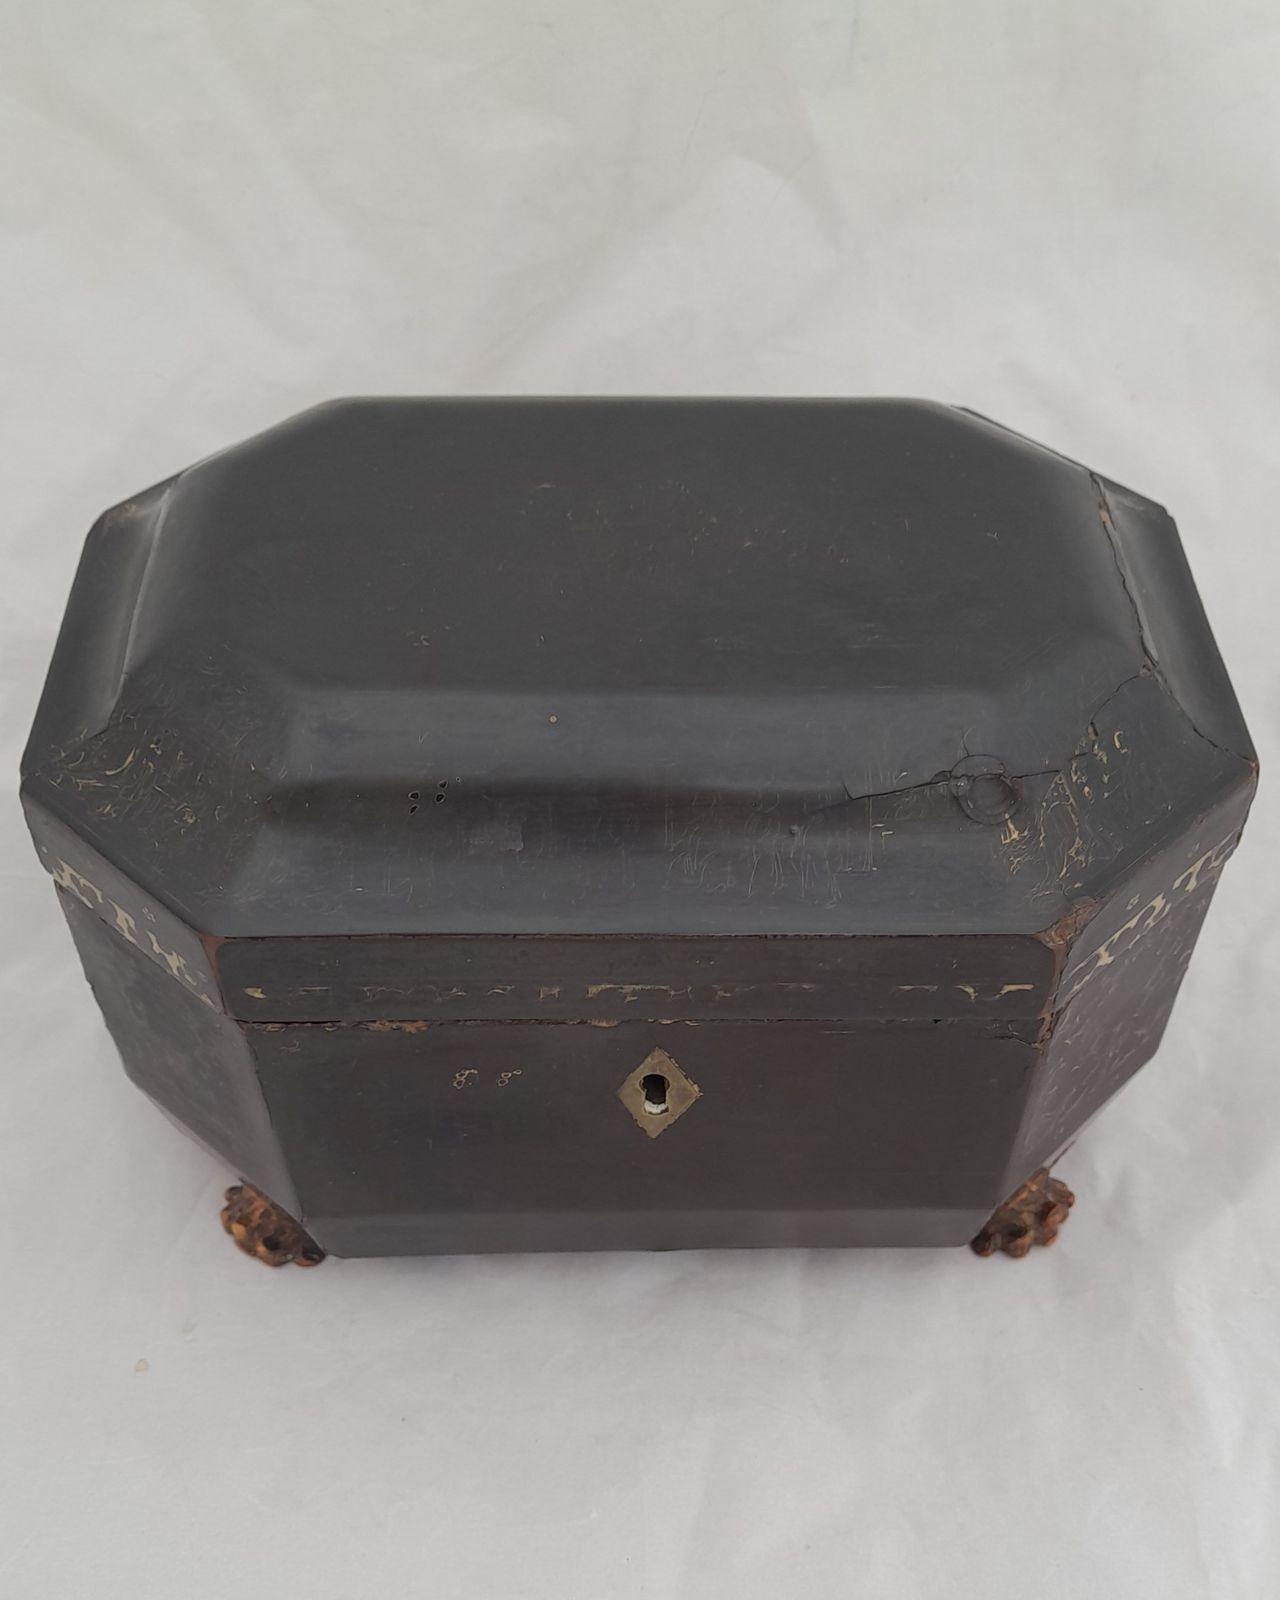 Antique Chinese Daoguang period Gilt and Black Lacquer rectangular with canted corners Tea Chest. The lidded chest stands on four lion paw feet and has two internal Paktong or pewter Tea canisters or Caddies with lids and covers. This item dates to the mid 19th Century circa 1840.